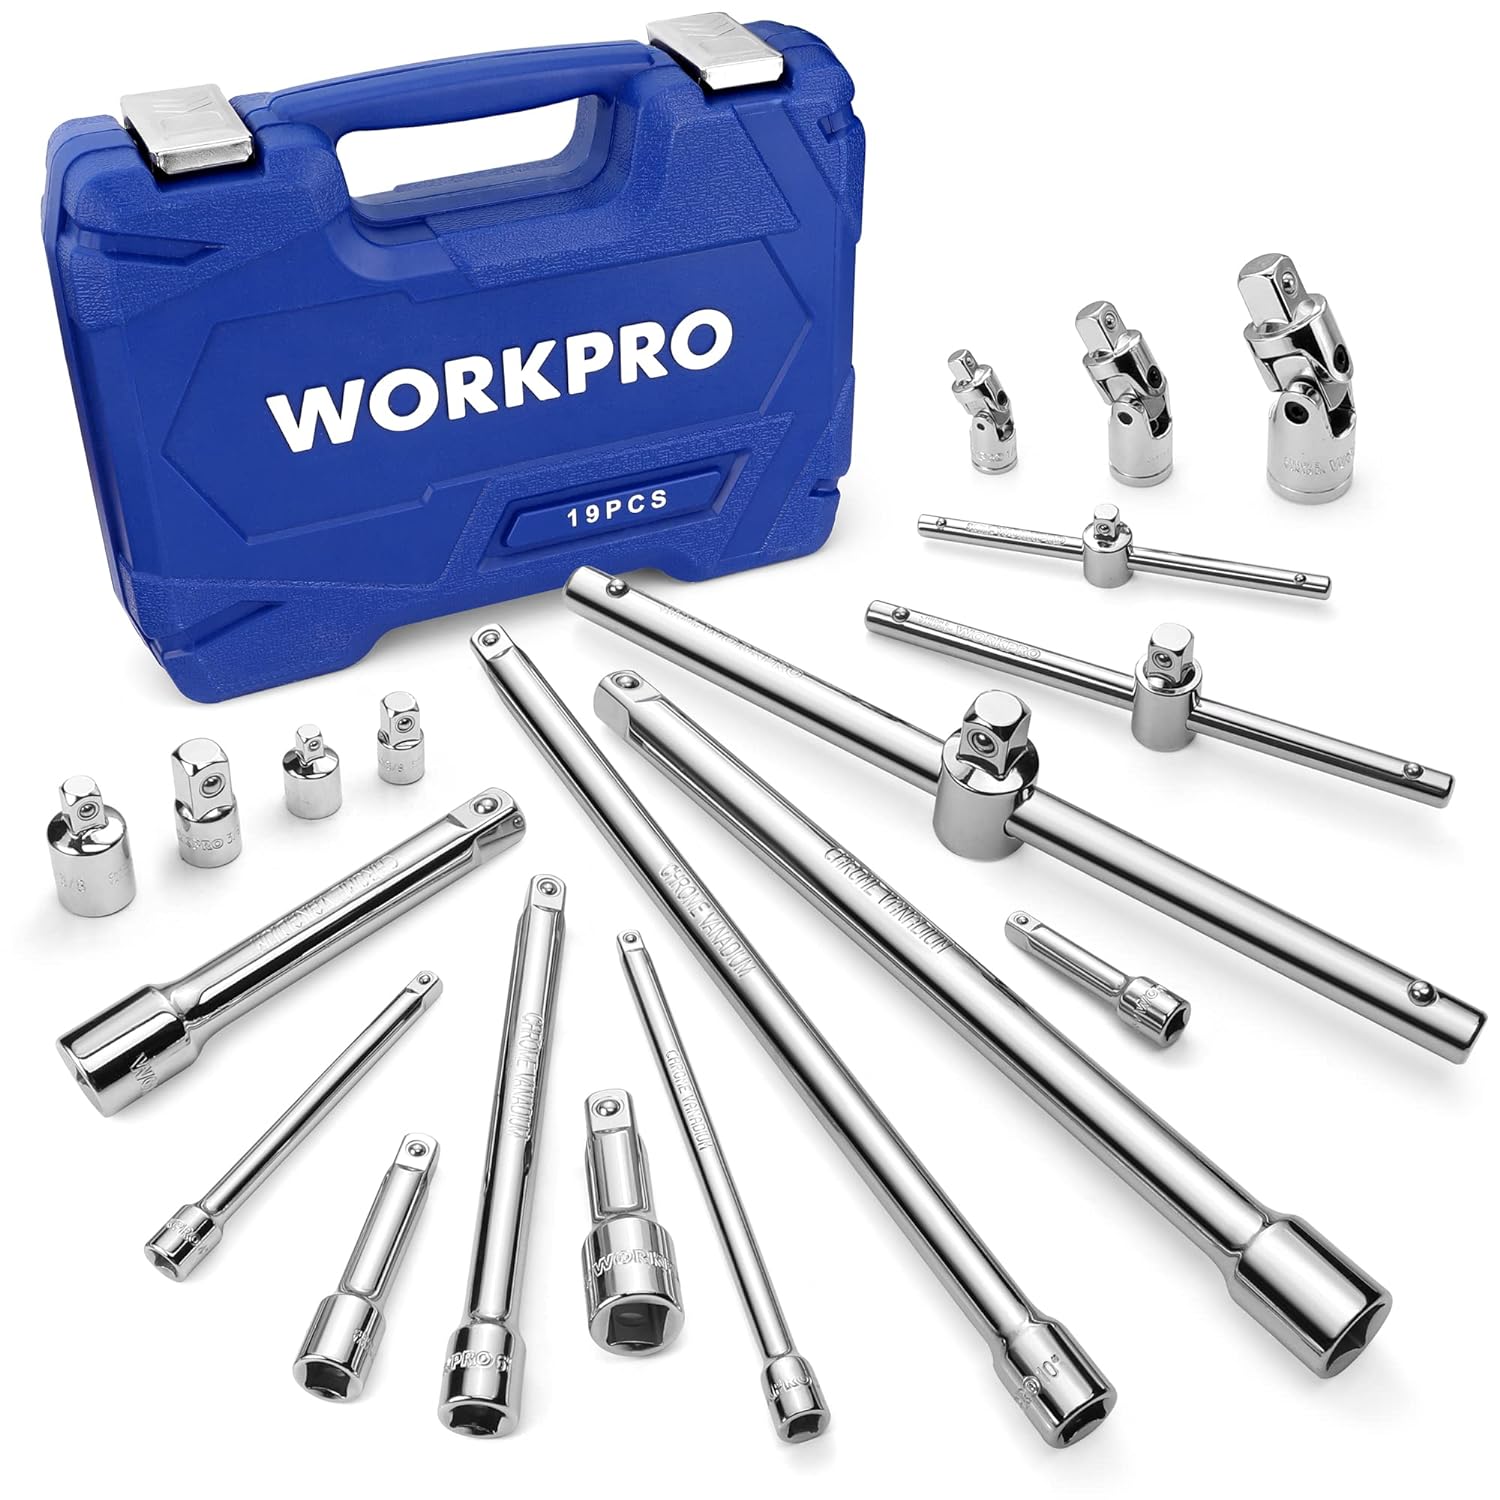 WORKPRO 19-Piece Drive Socket Extensions Set, Includes Socket Adapters, Extensions, Universal Joints and Sliding Bar T-handle…